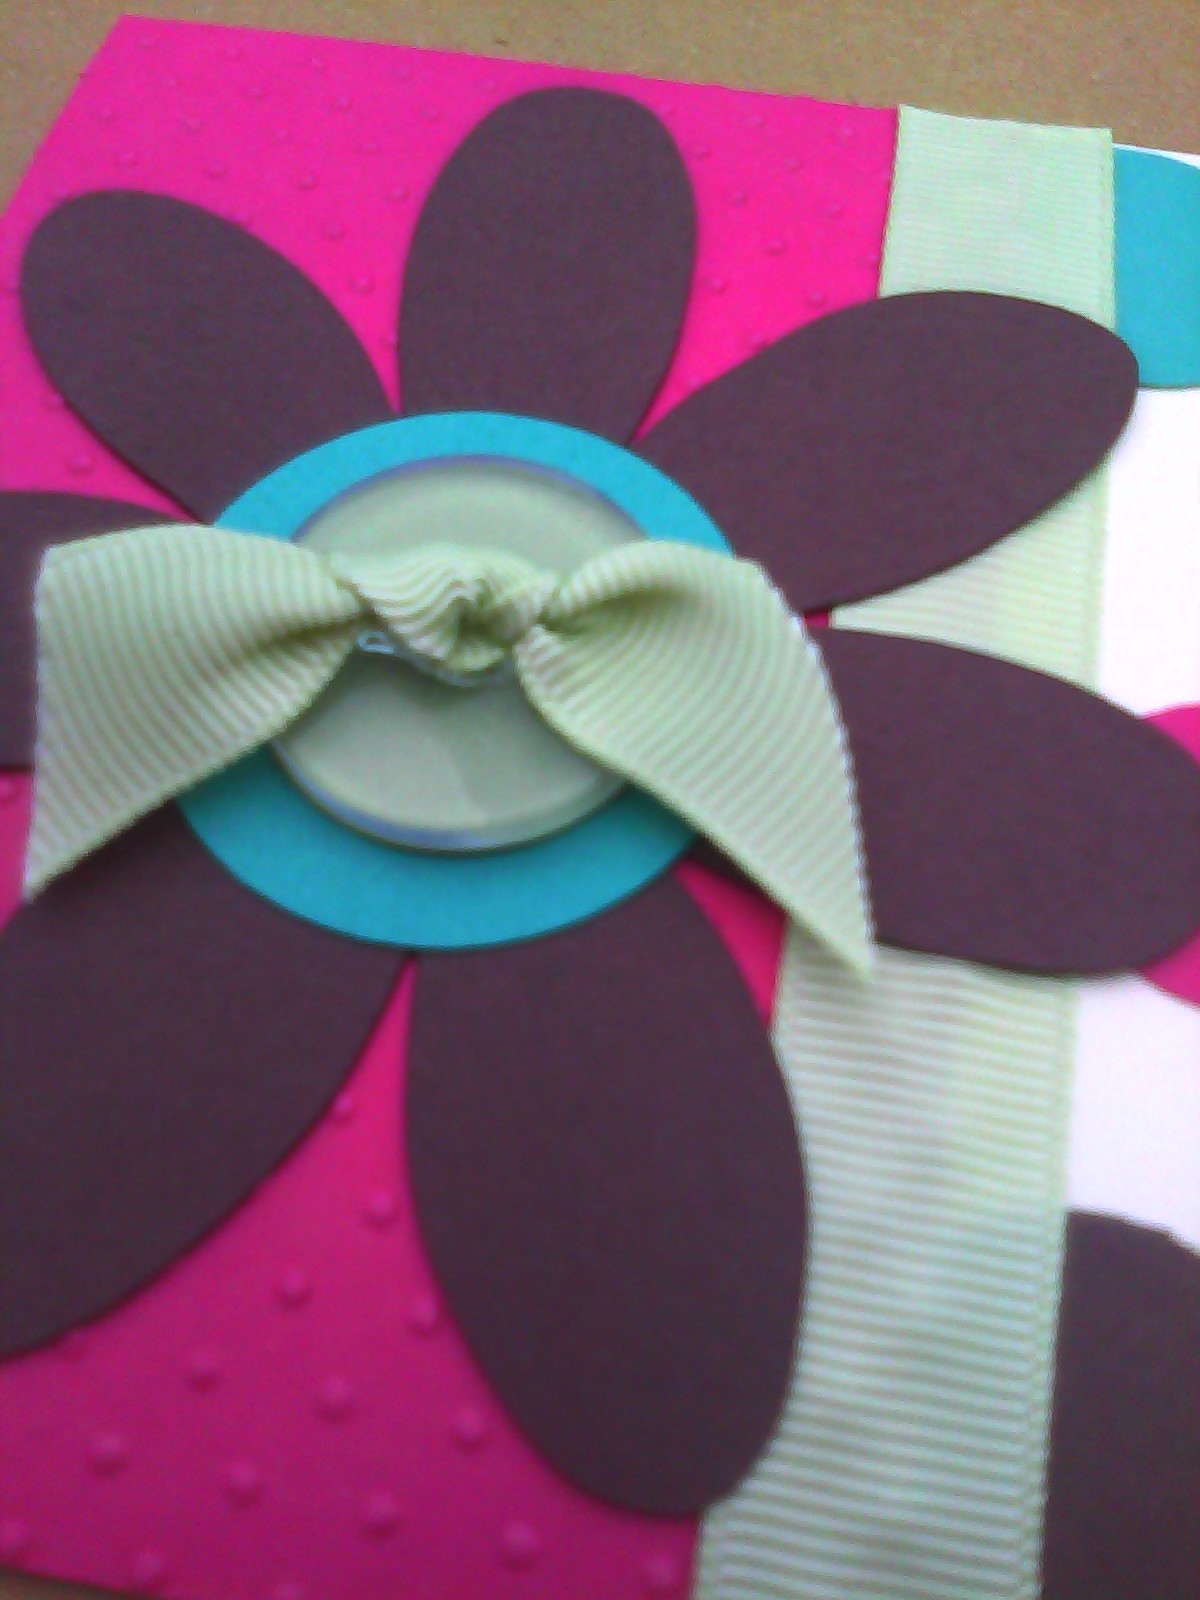 sistochris Scrapbooking and Paper Crafts: Cricut Flower Greeting Card